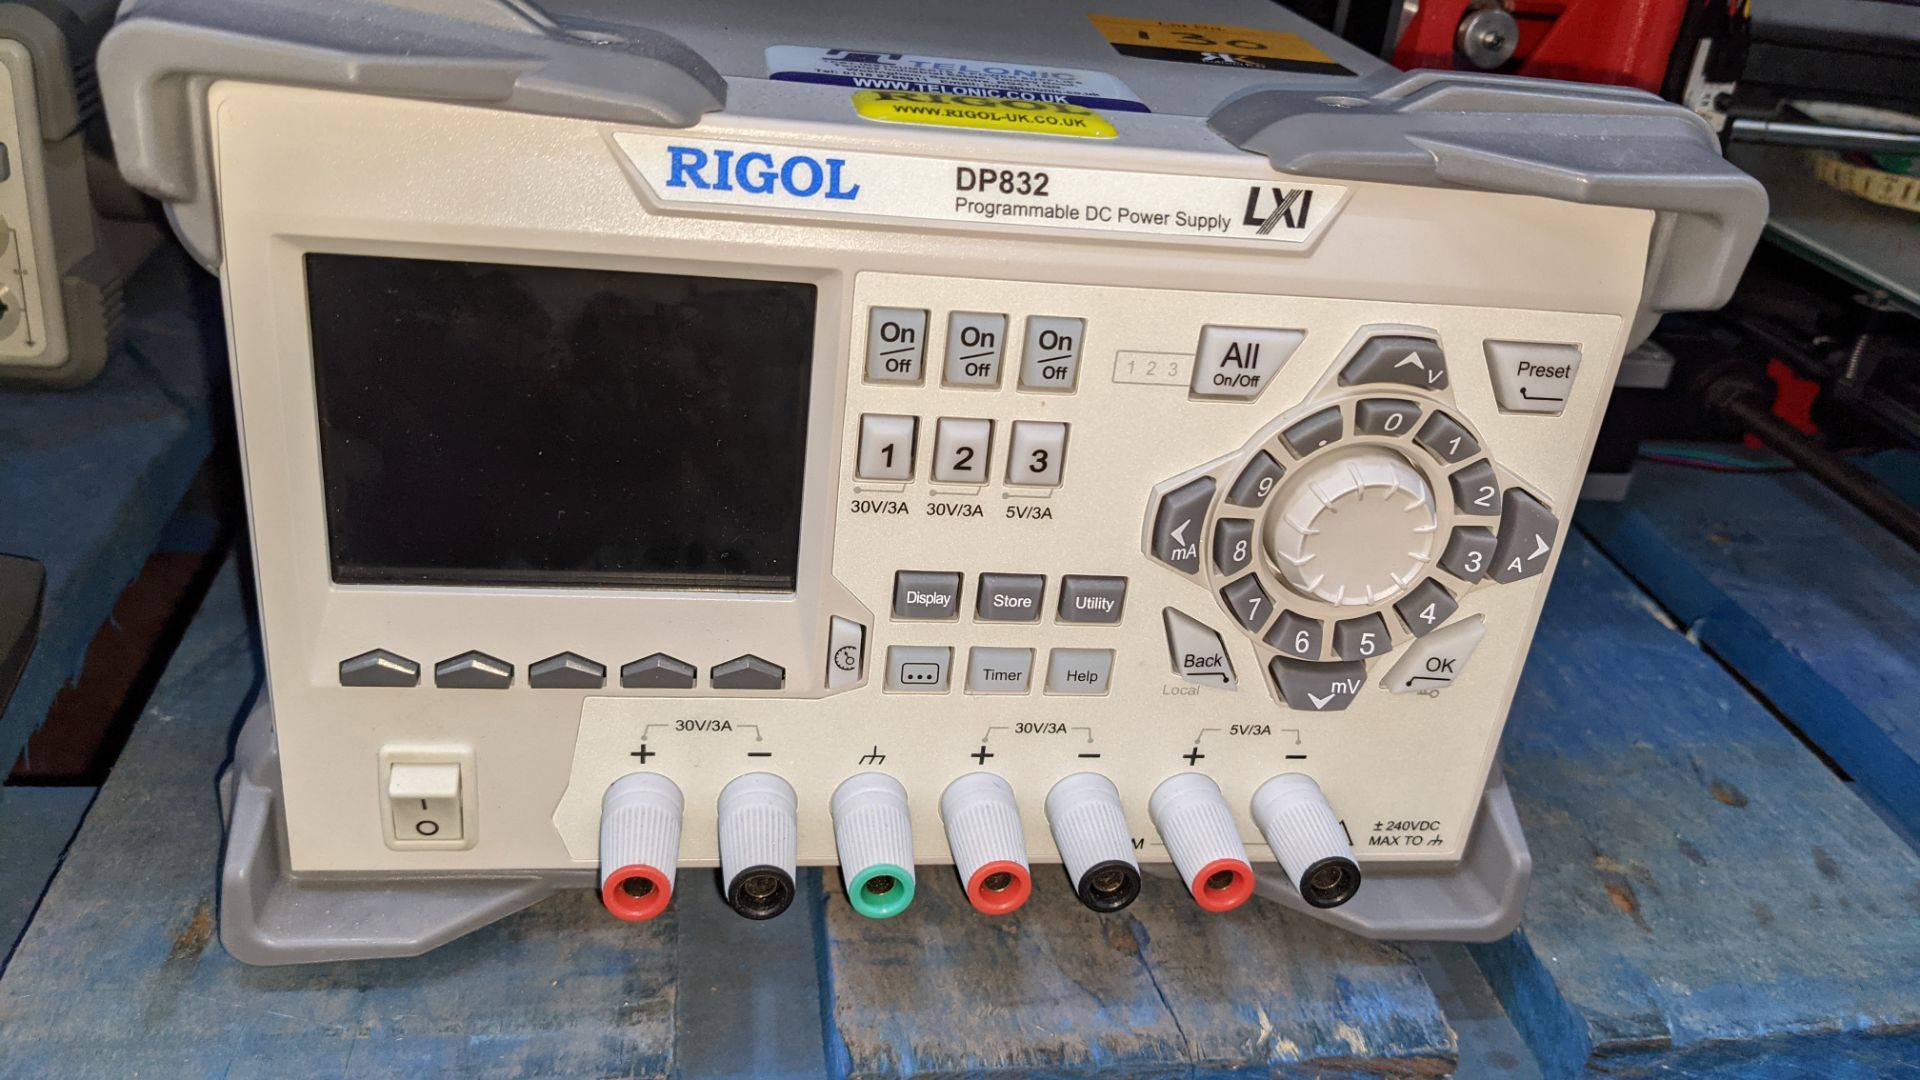 Rigol model DP832 programmable DC power supply - Image 11 of 11